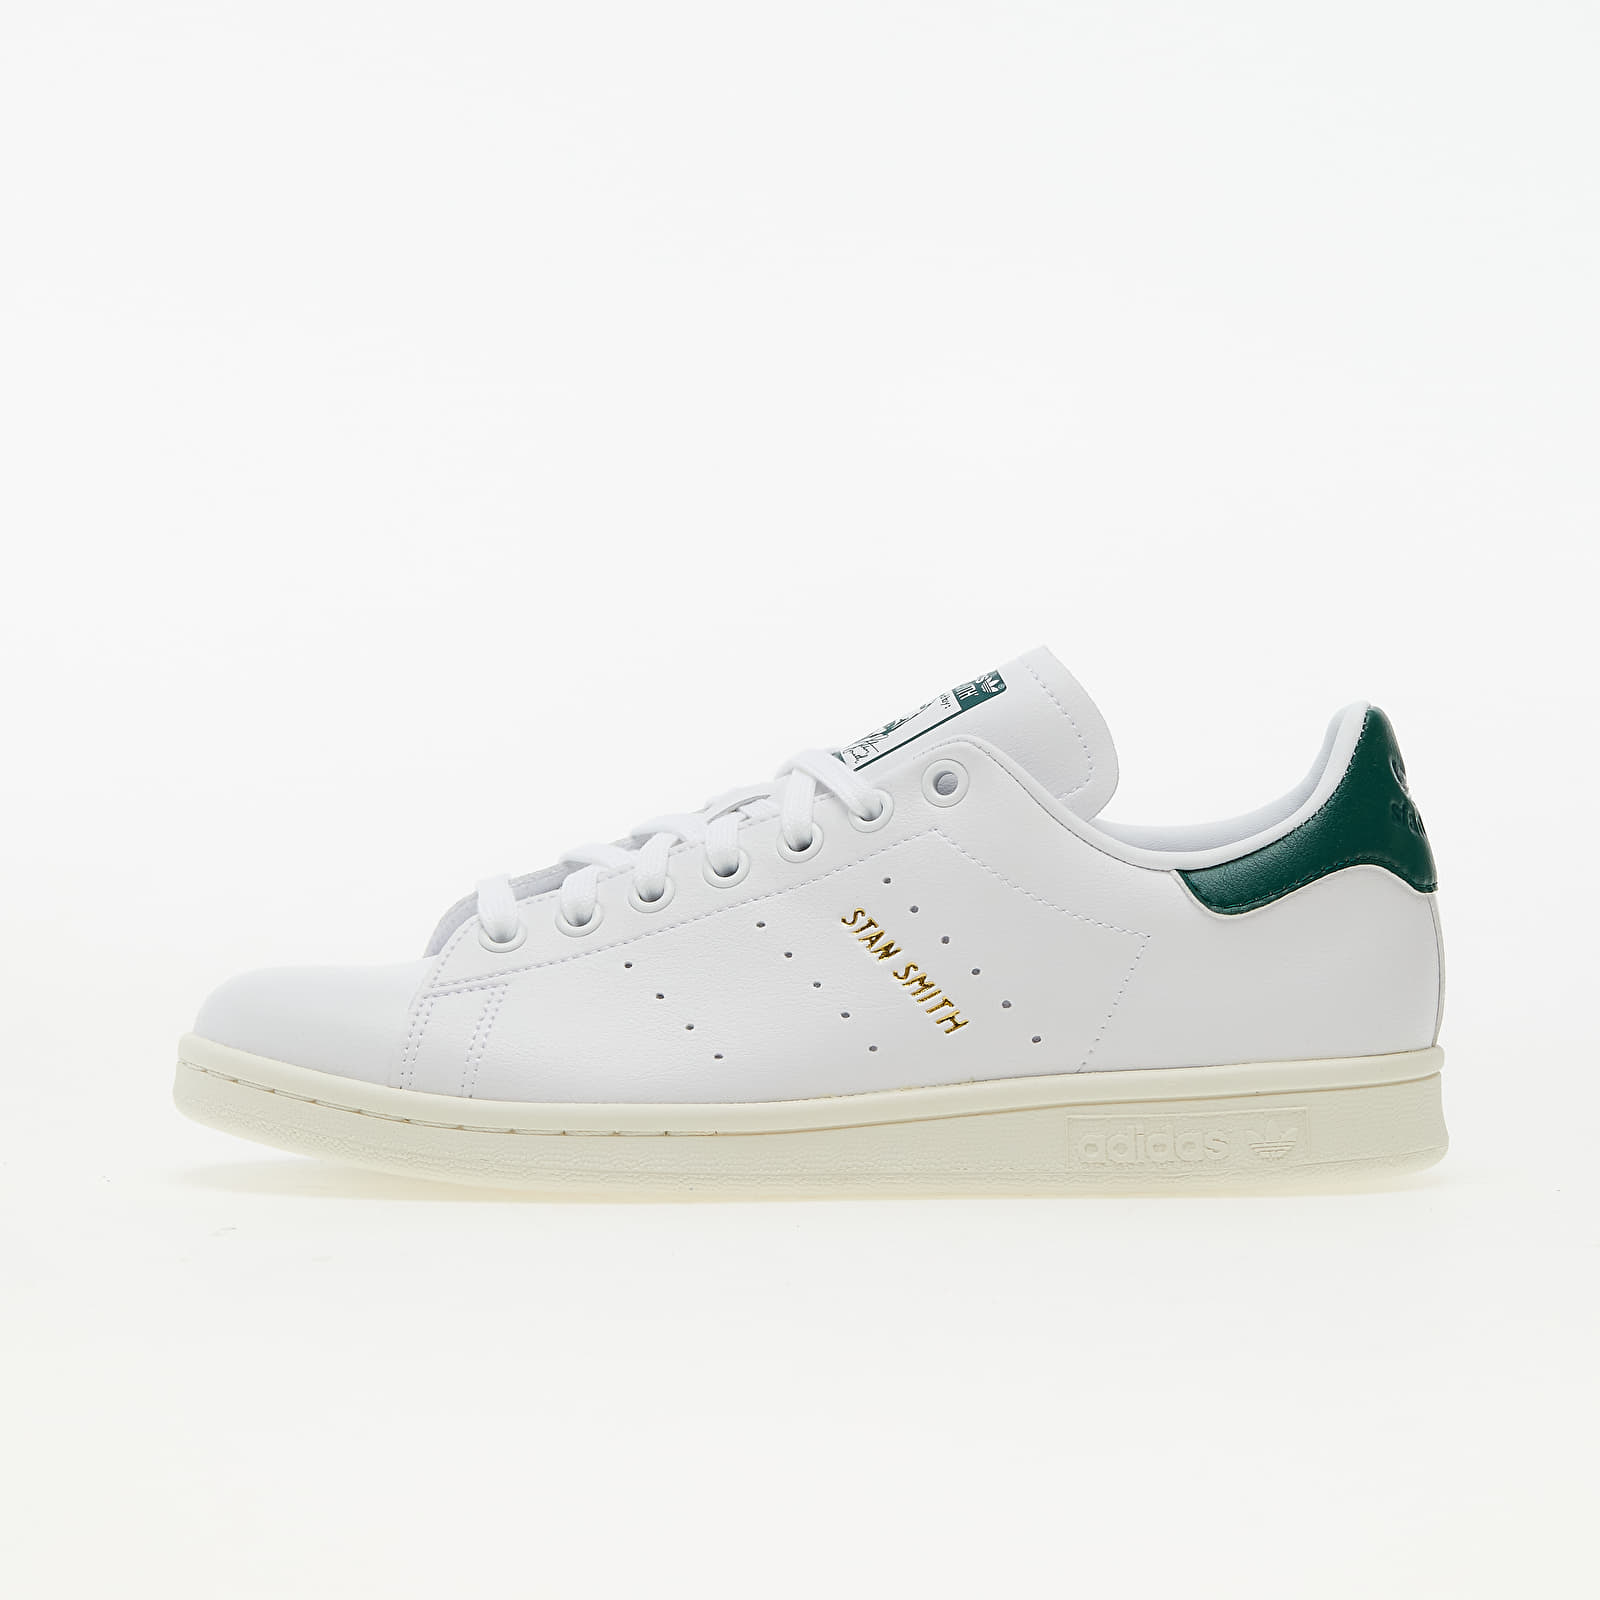 Chaussures et baskets homme adidas Stan Smith Ftw White/ Core Green/ Off White